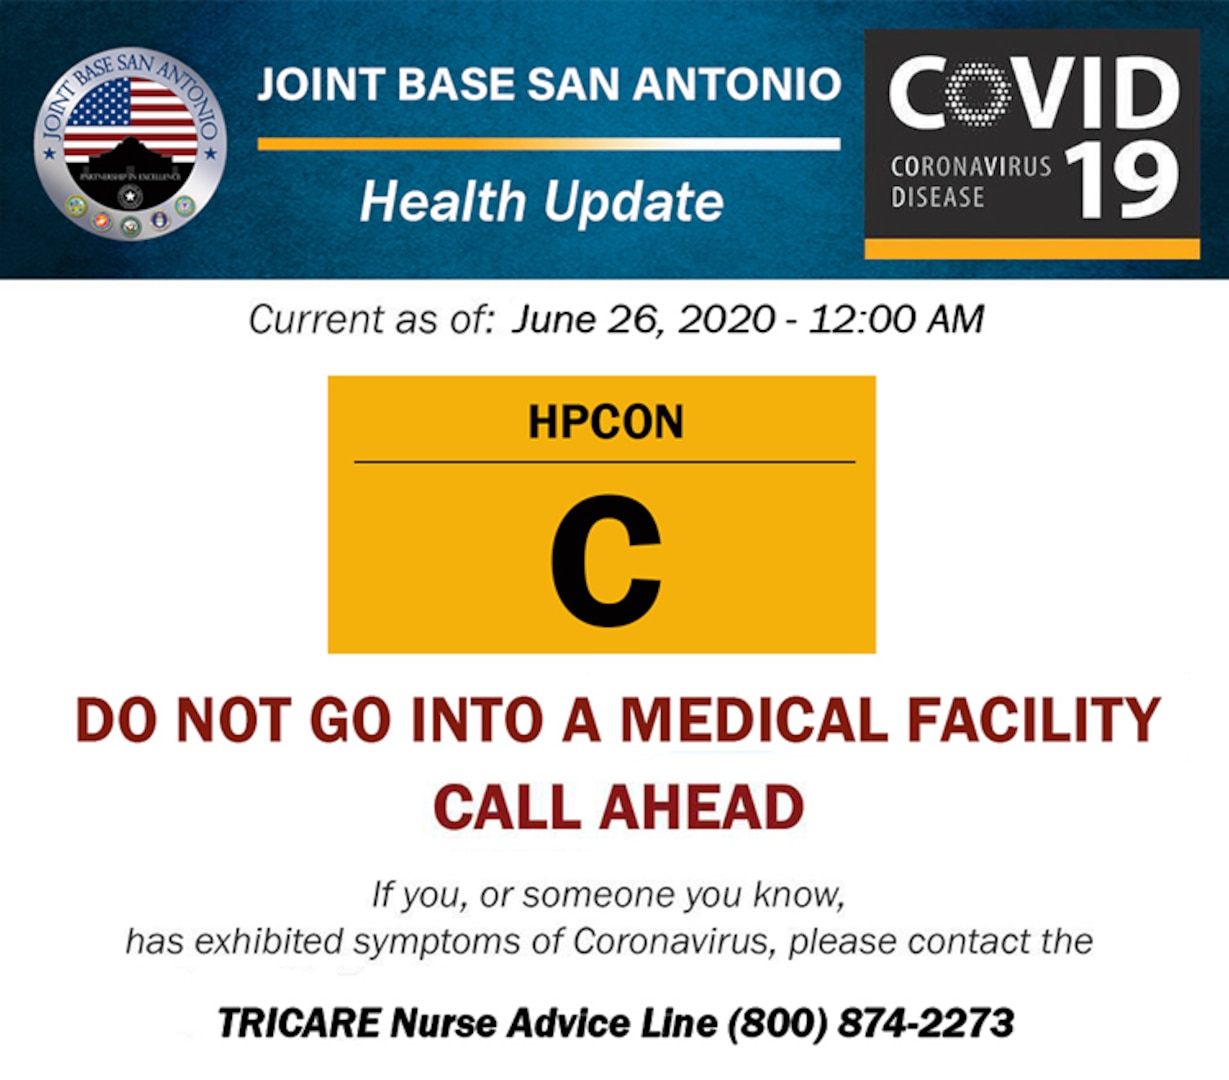 To better posture Joint Base San Antonio and help reduce community spread of COVID-19, the JBSA commander is increasing the Health Protection Condition to Charlie, or HPCON C effective June 26.